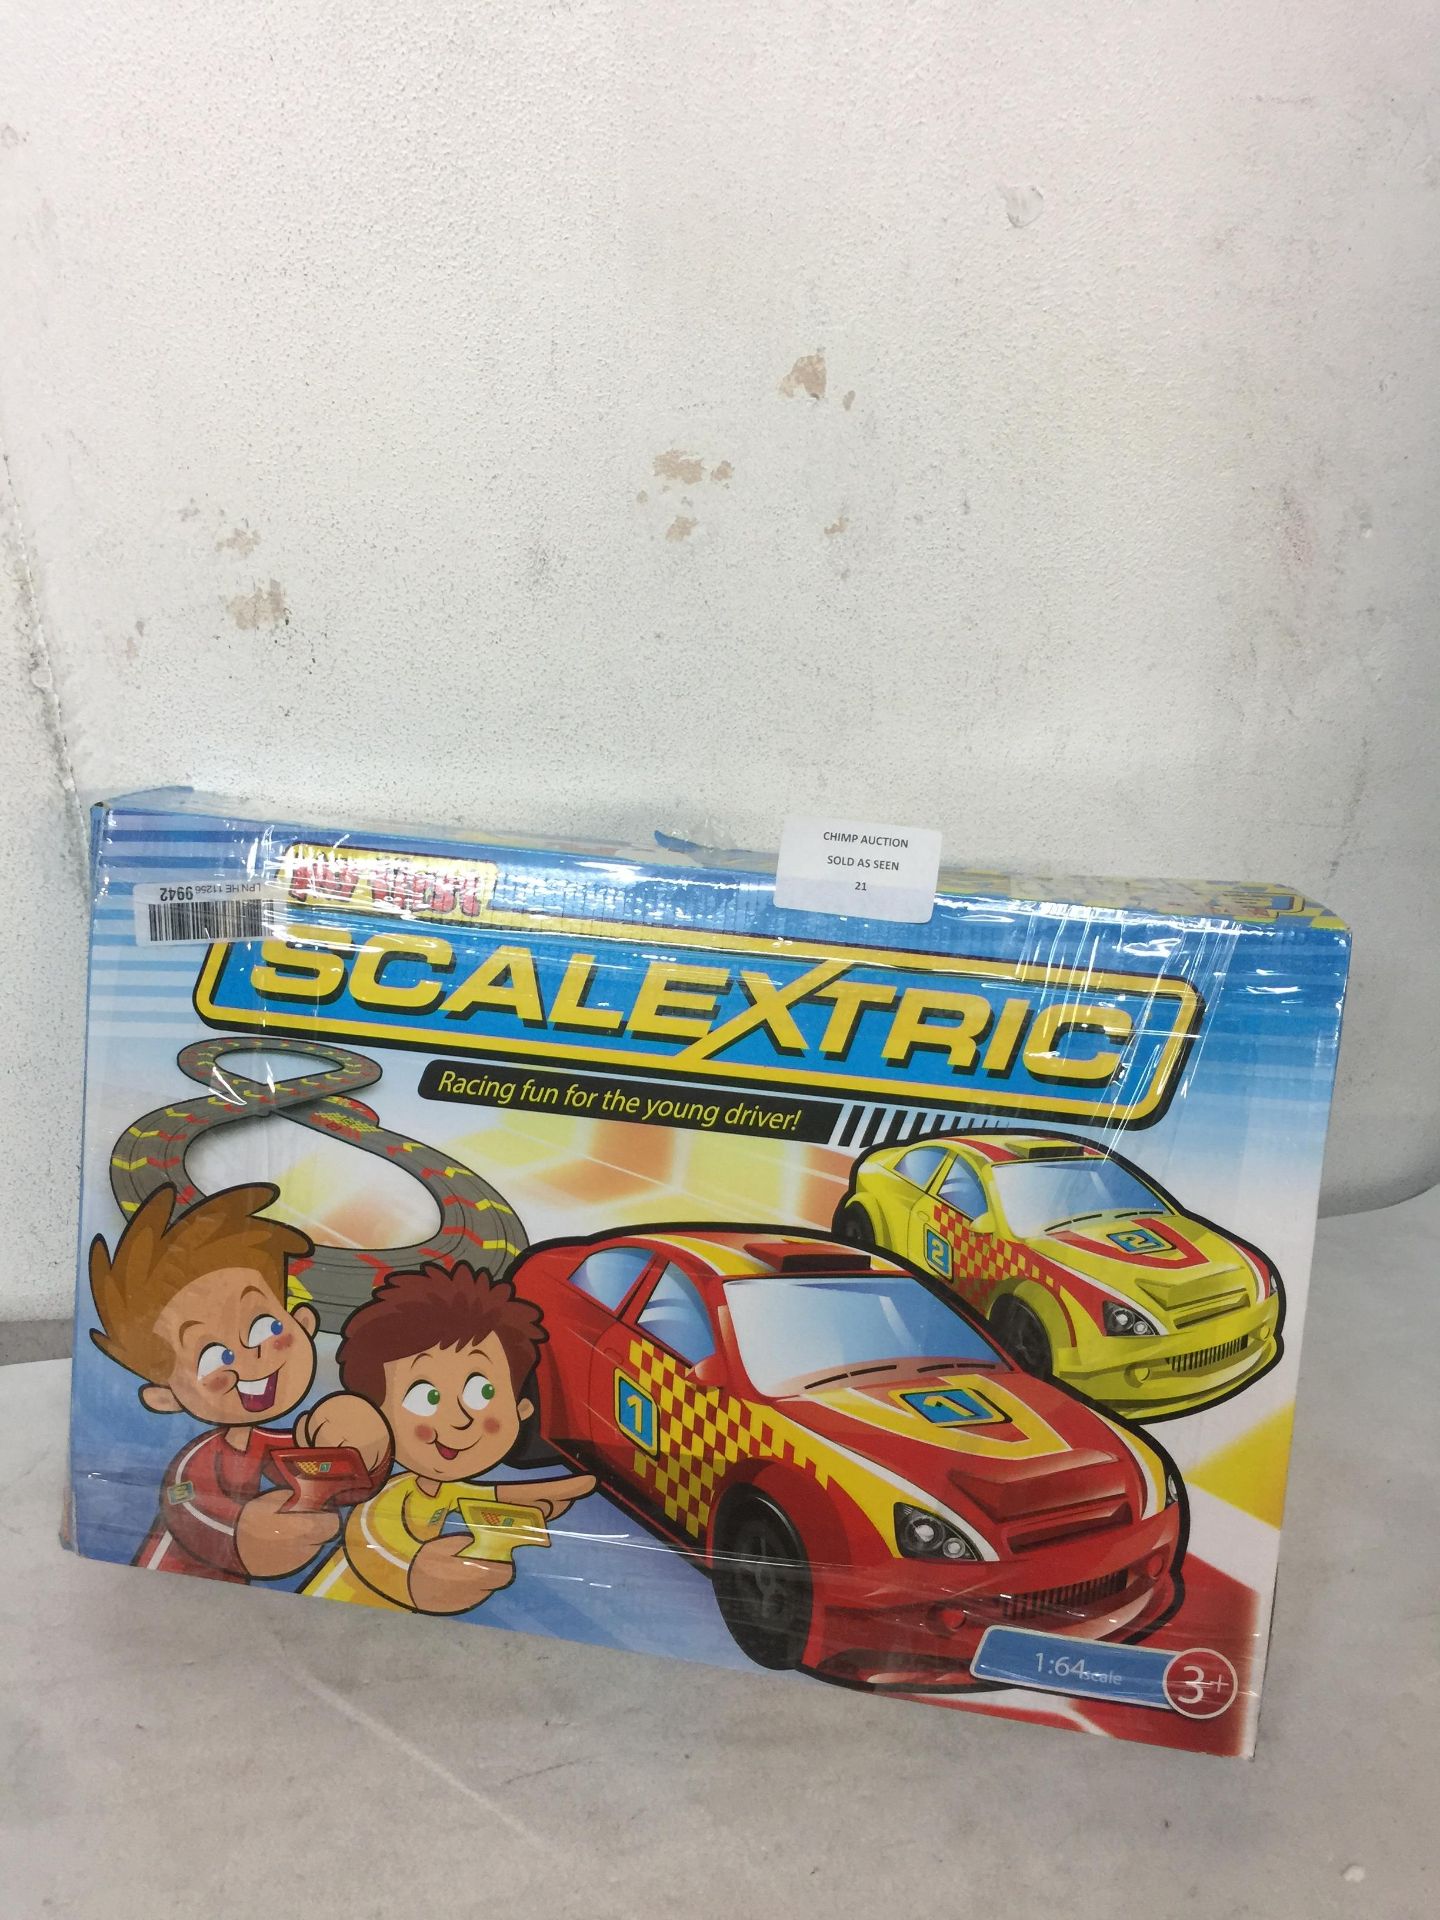 MY FIRST SCALEXTRIC RACE CARS